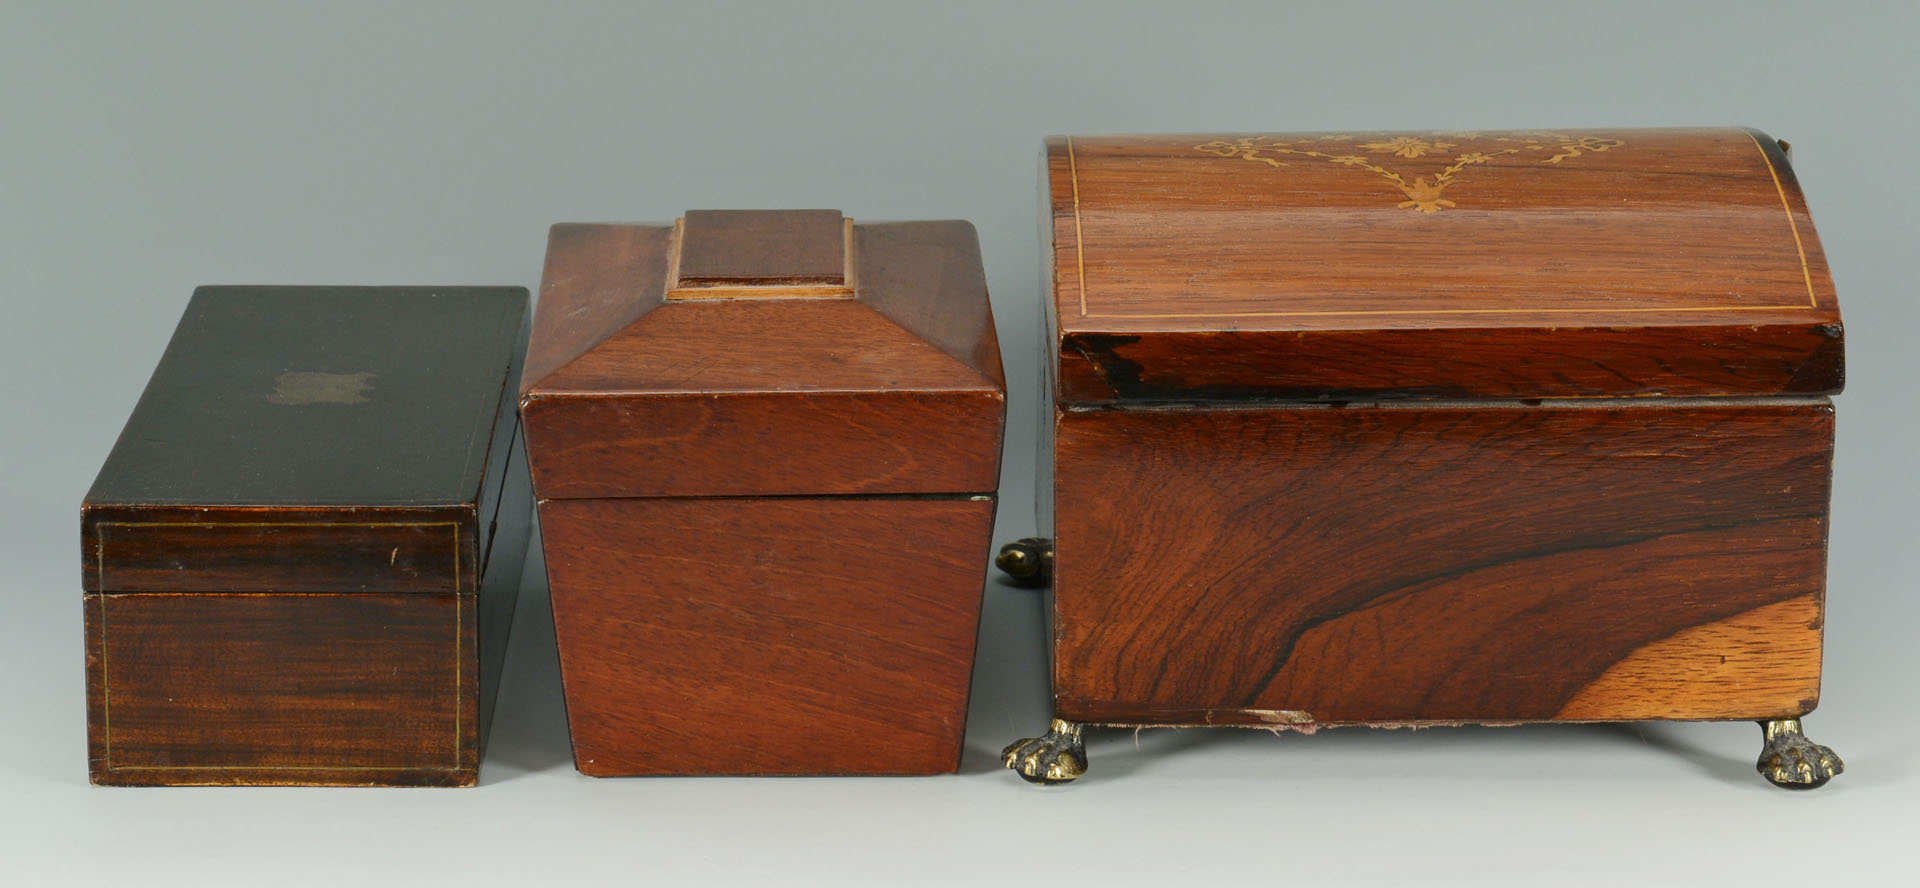 Lot 126: Grouping of 3 Desk Storage Boxes, inlaid